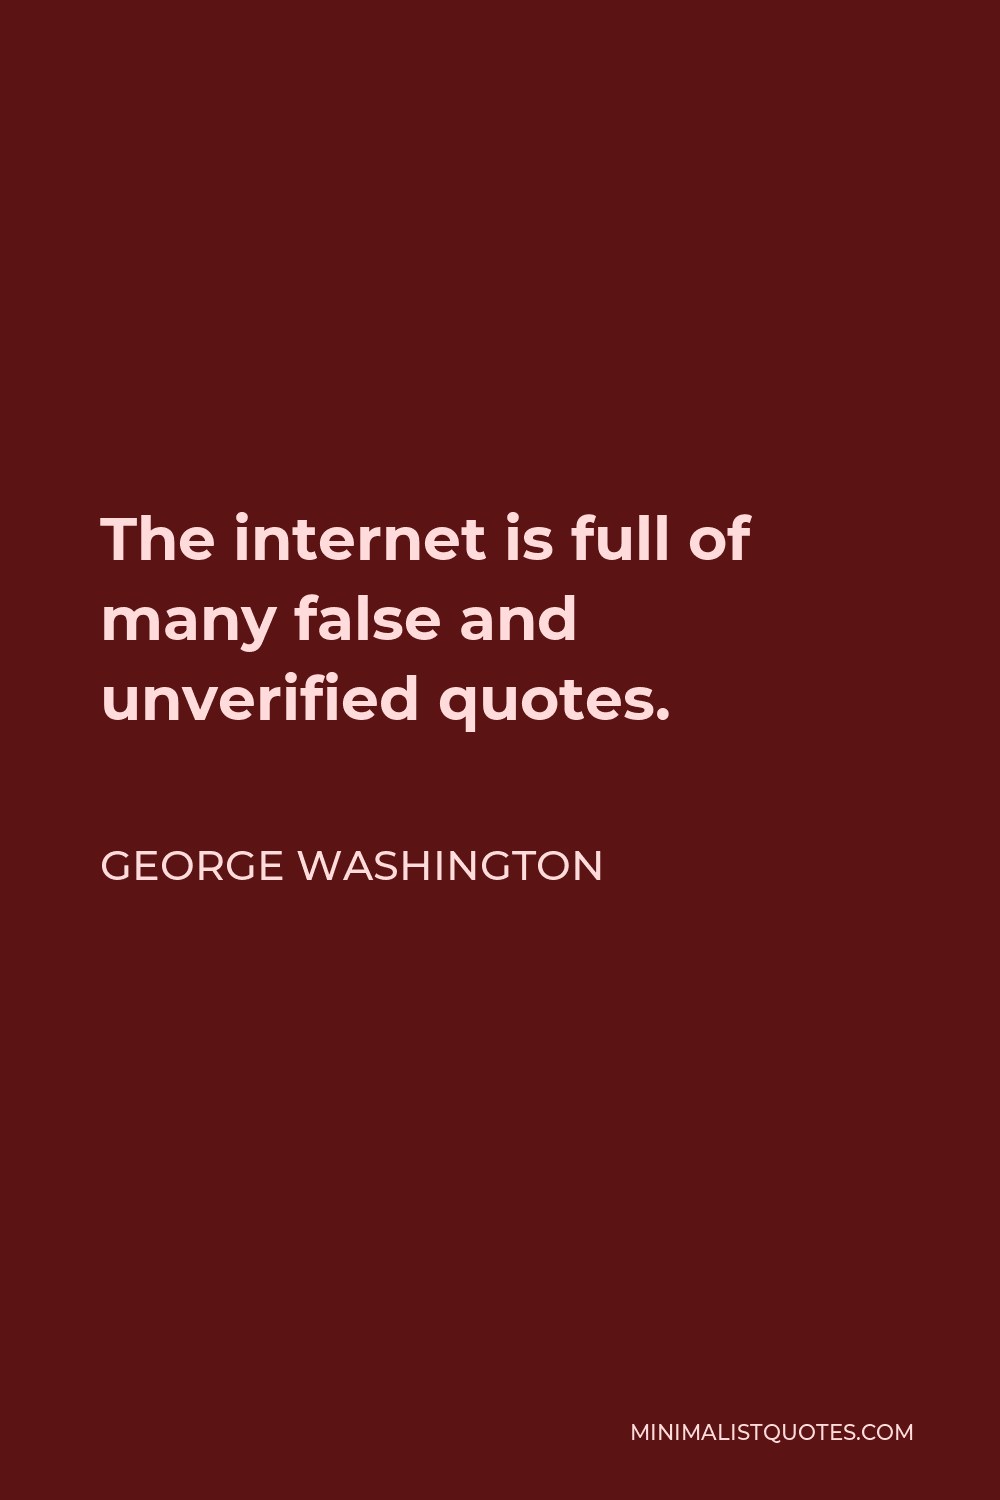 George Washington Quote - The internet is full of many false and unverified quotes.